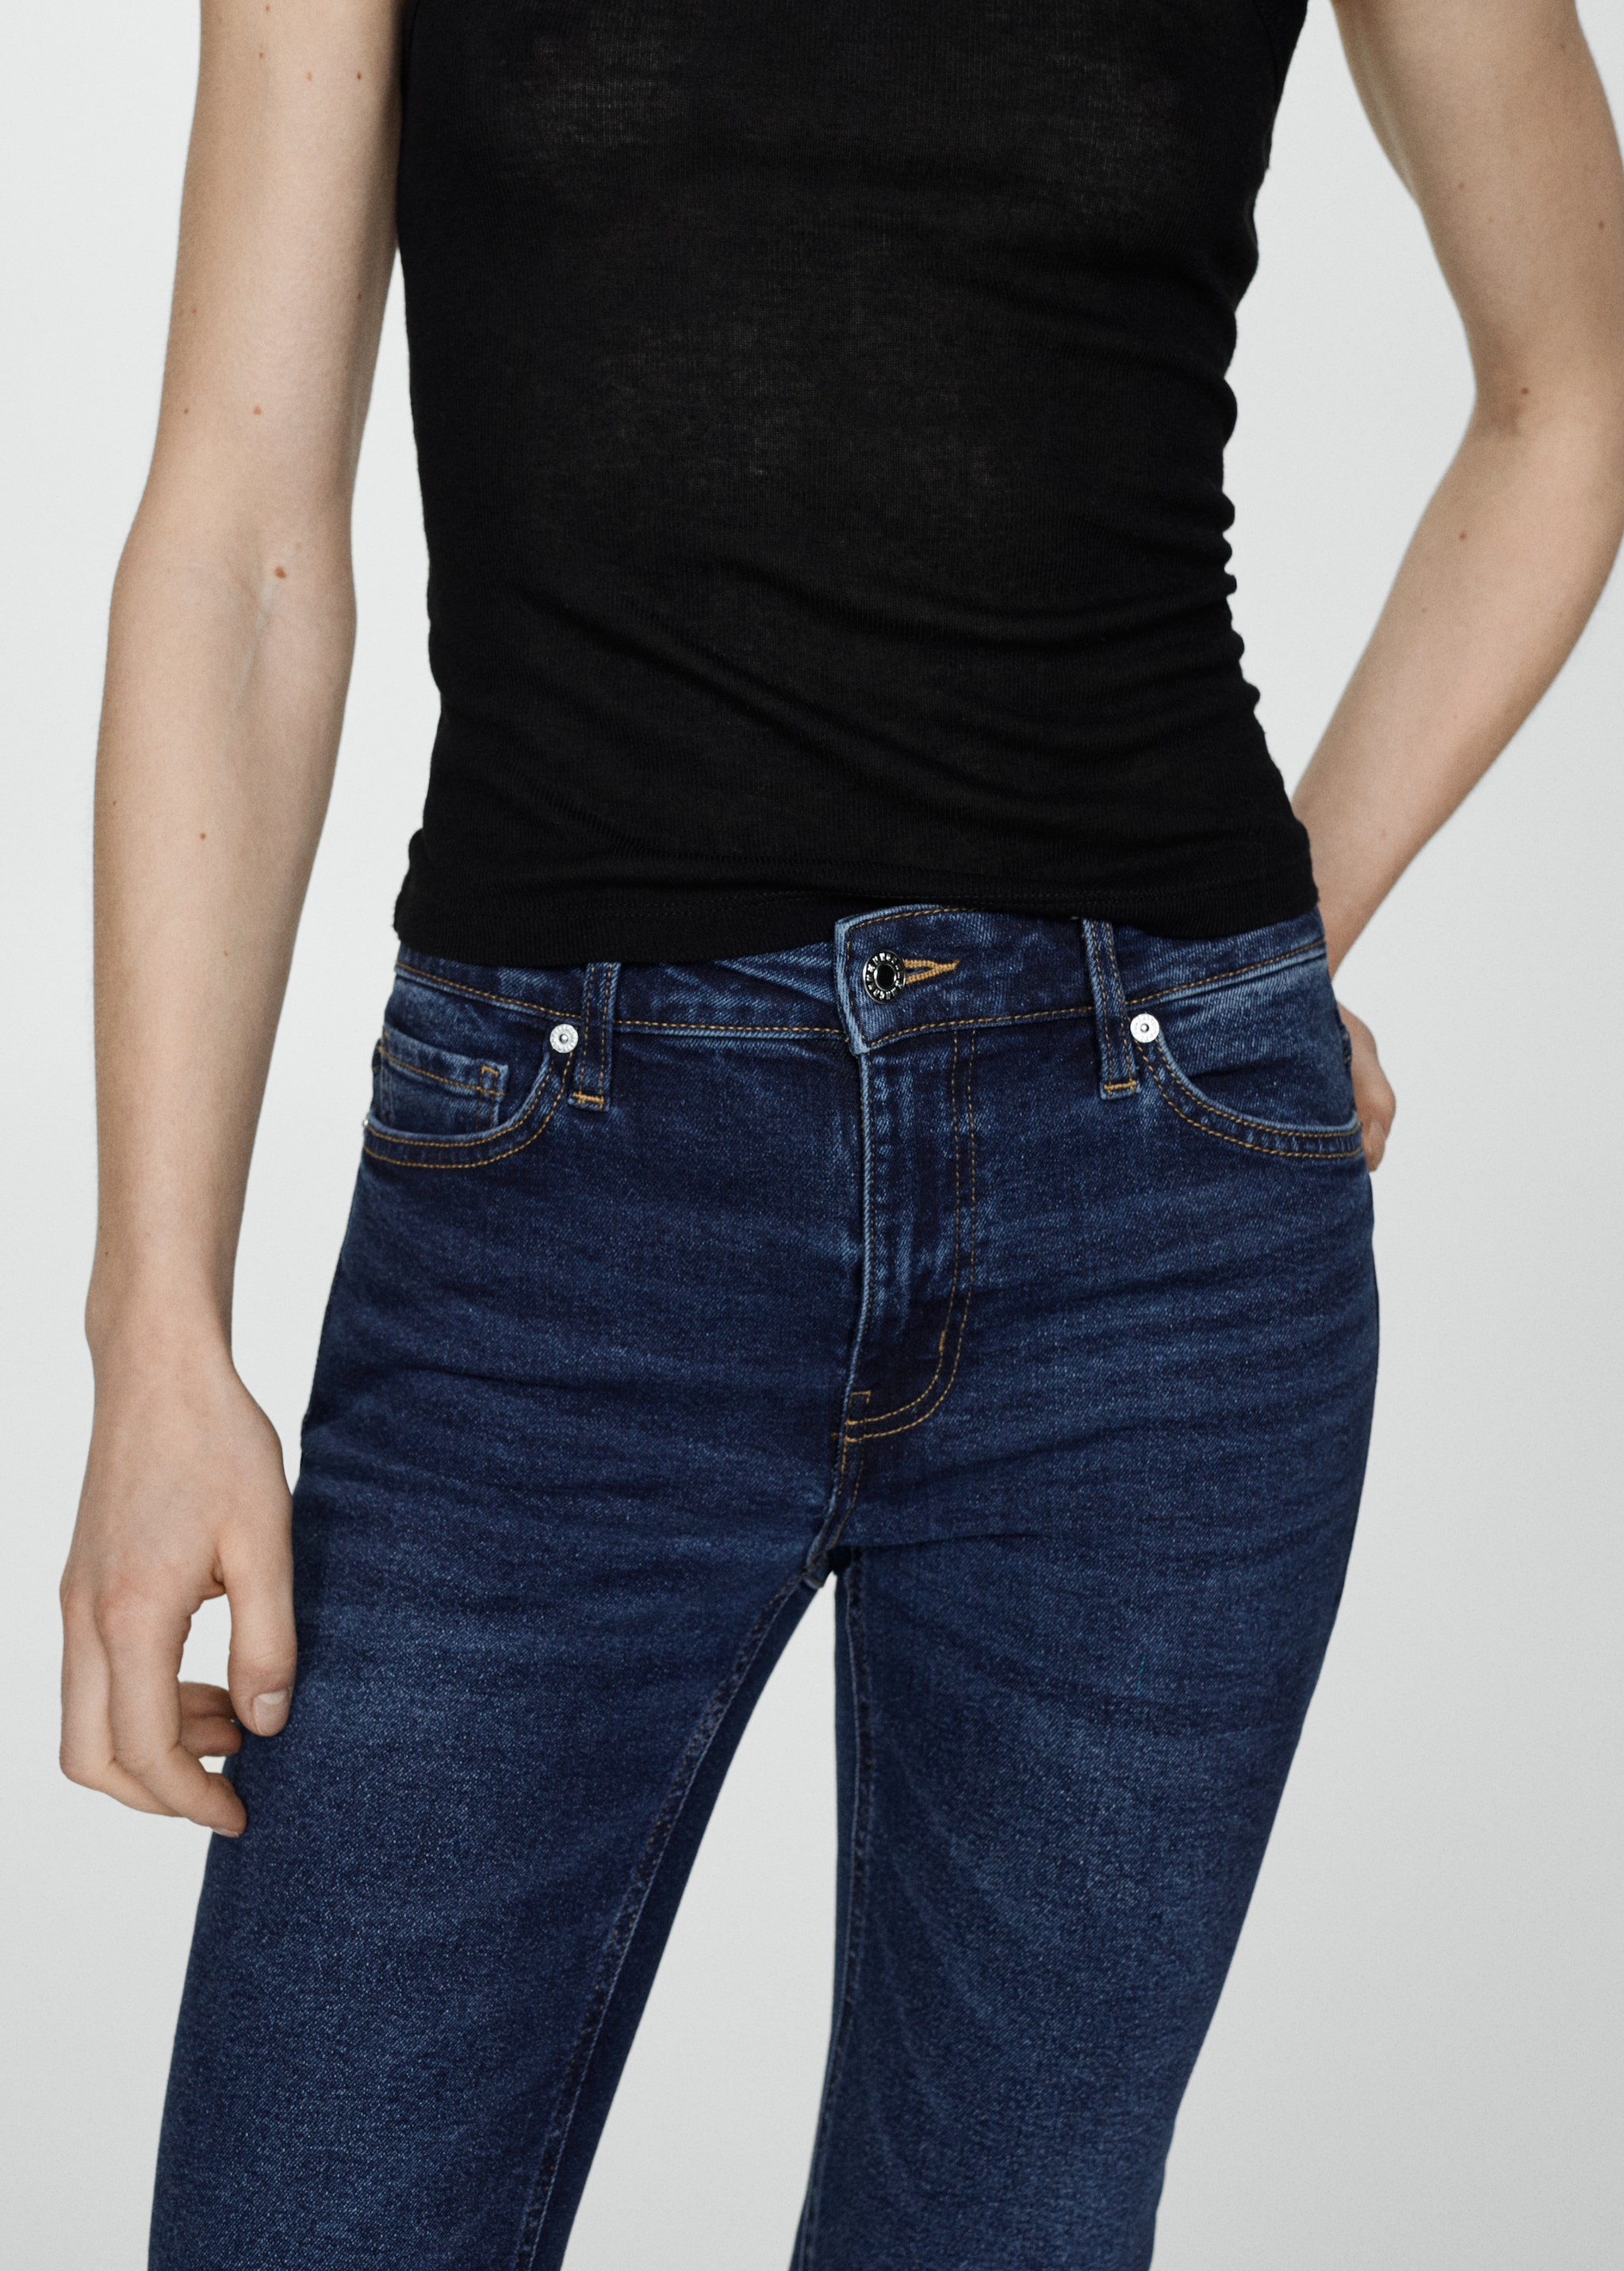 Jeans Sienna flare crop - Details of the article 6